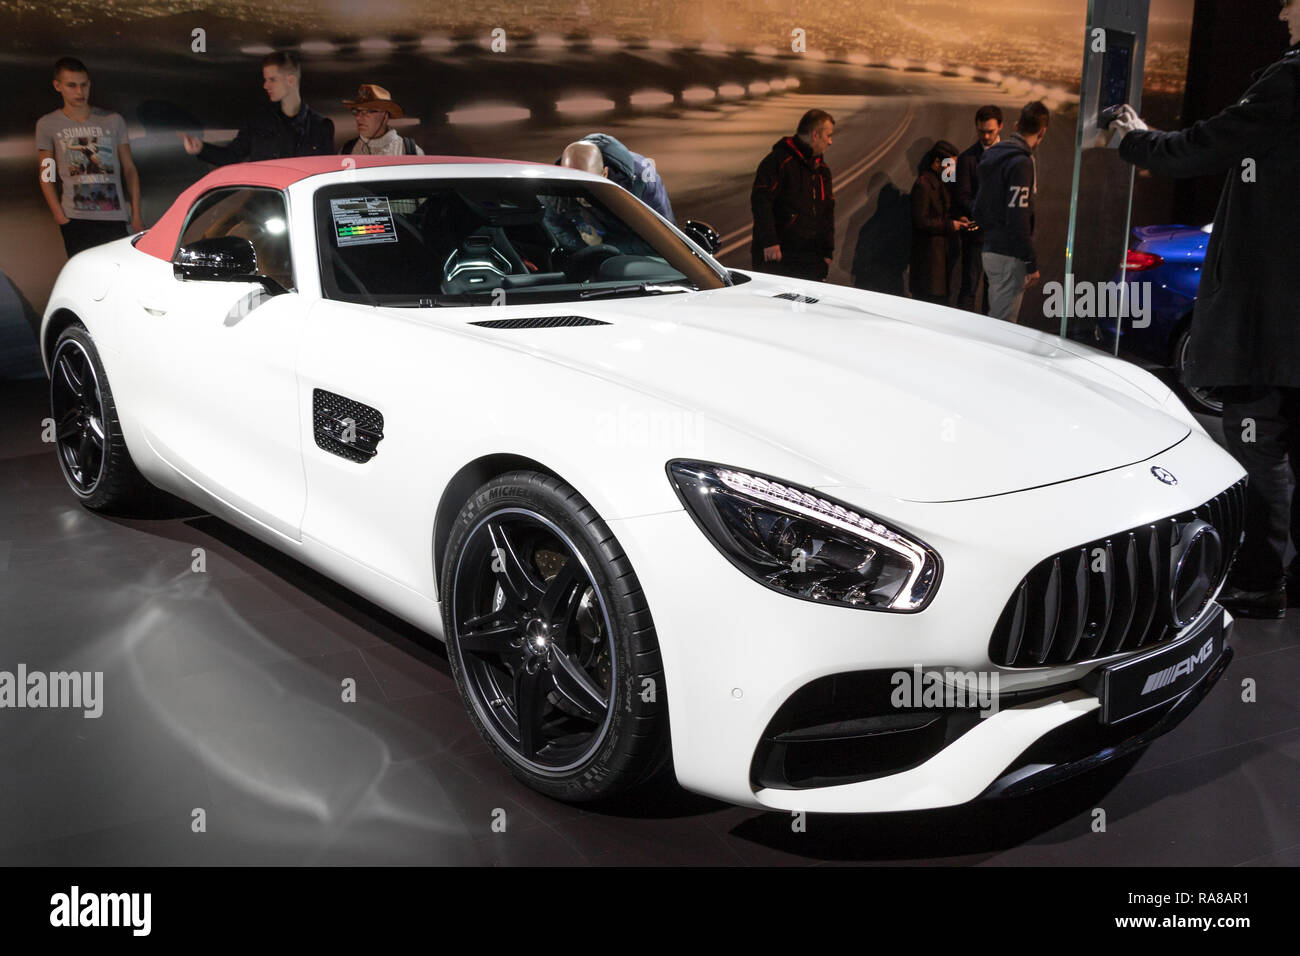 BRUSSELS - JAN 19, 2017: Mercedes AMG GT Roadster sports car presented at the Brussels Autosalon Motor Show. Stock Photo